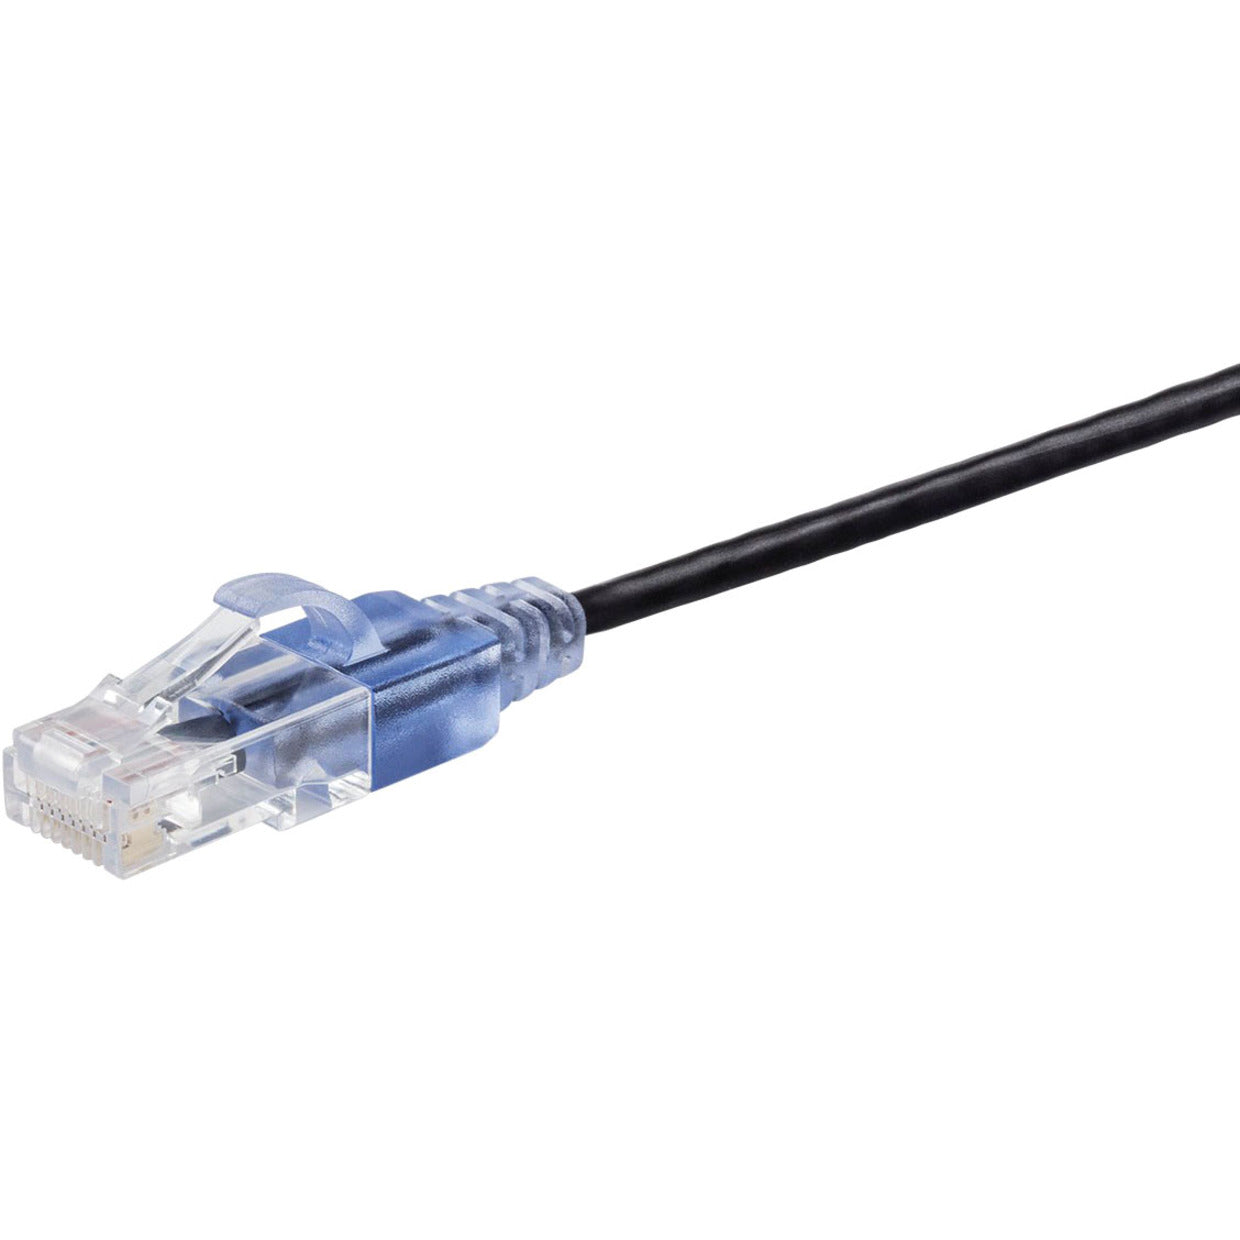 Monoprice 15149 SlimRun Cat6A Ethernet Network Patch Cable 1ft Black, 10-Pack